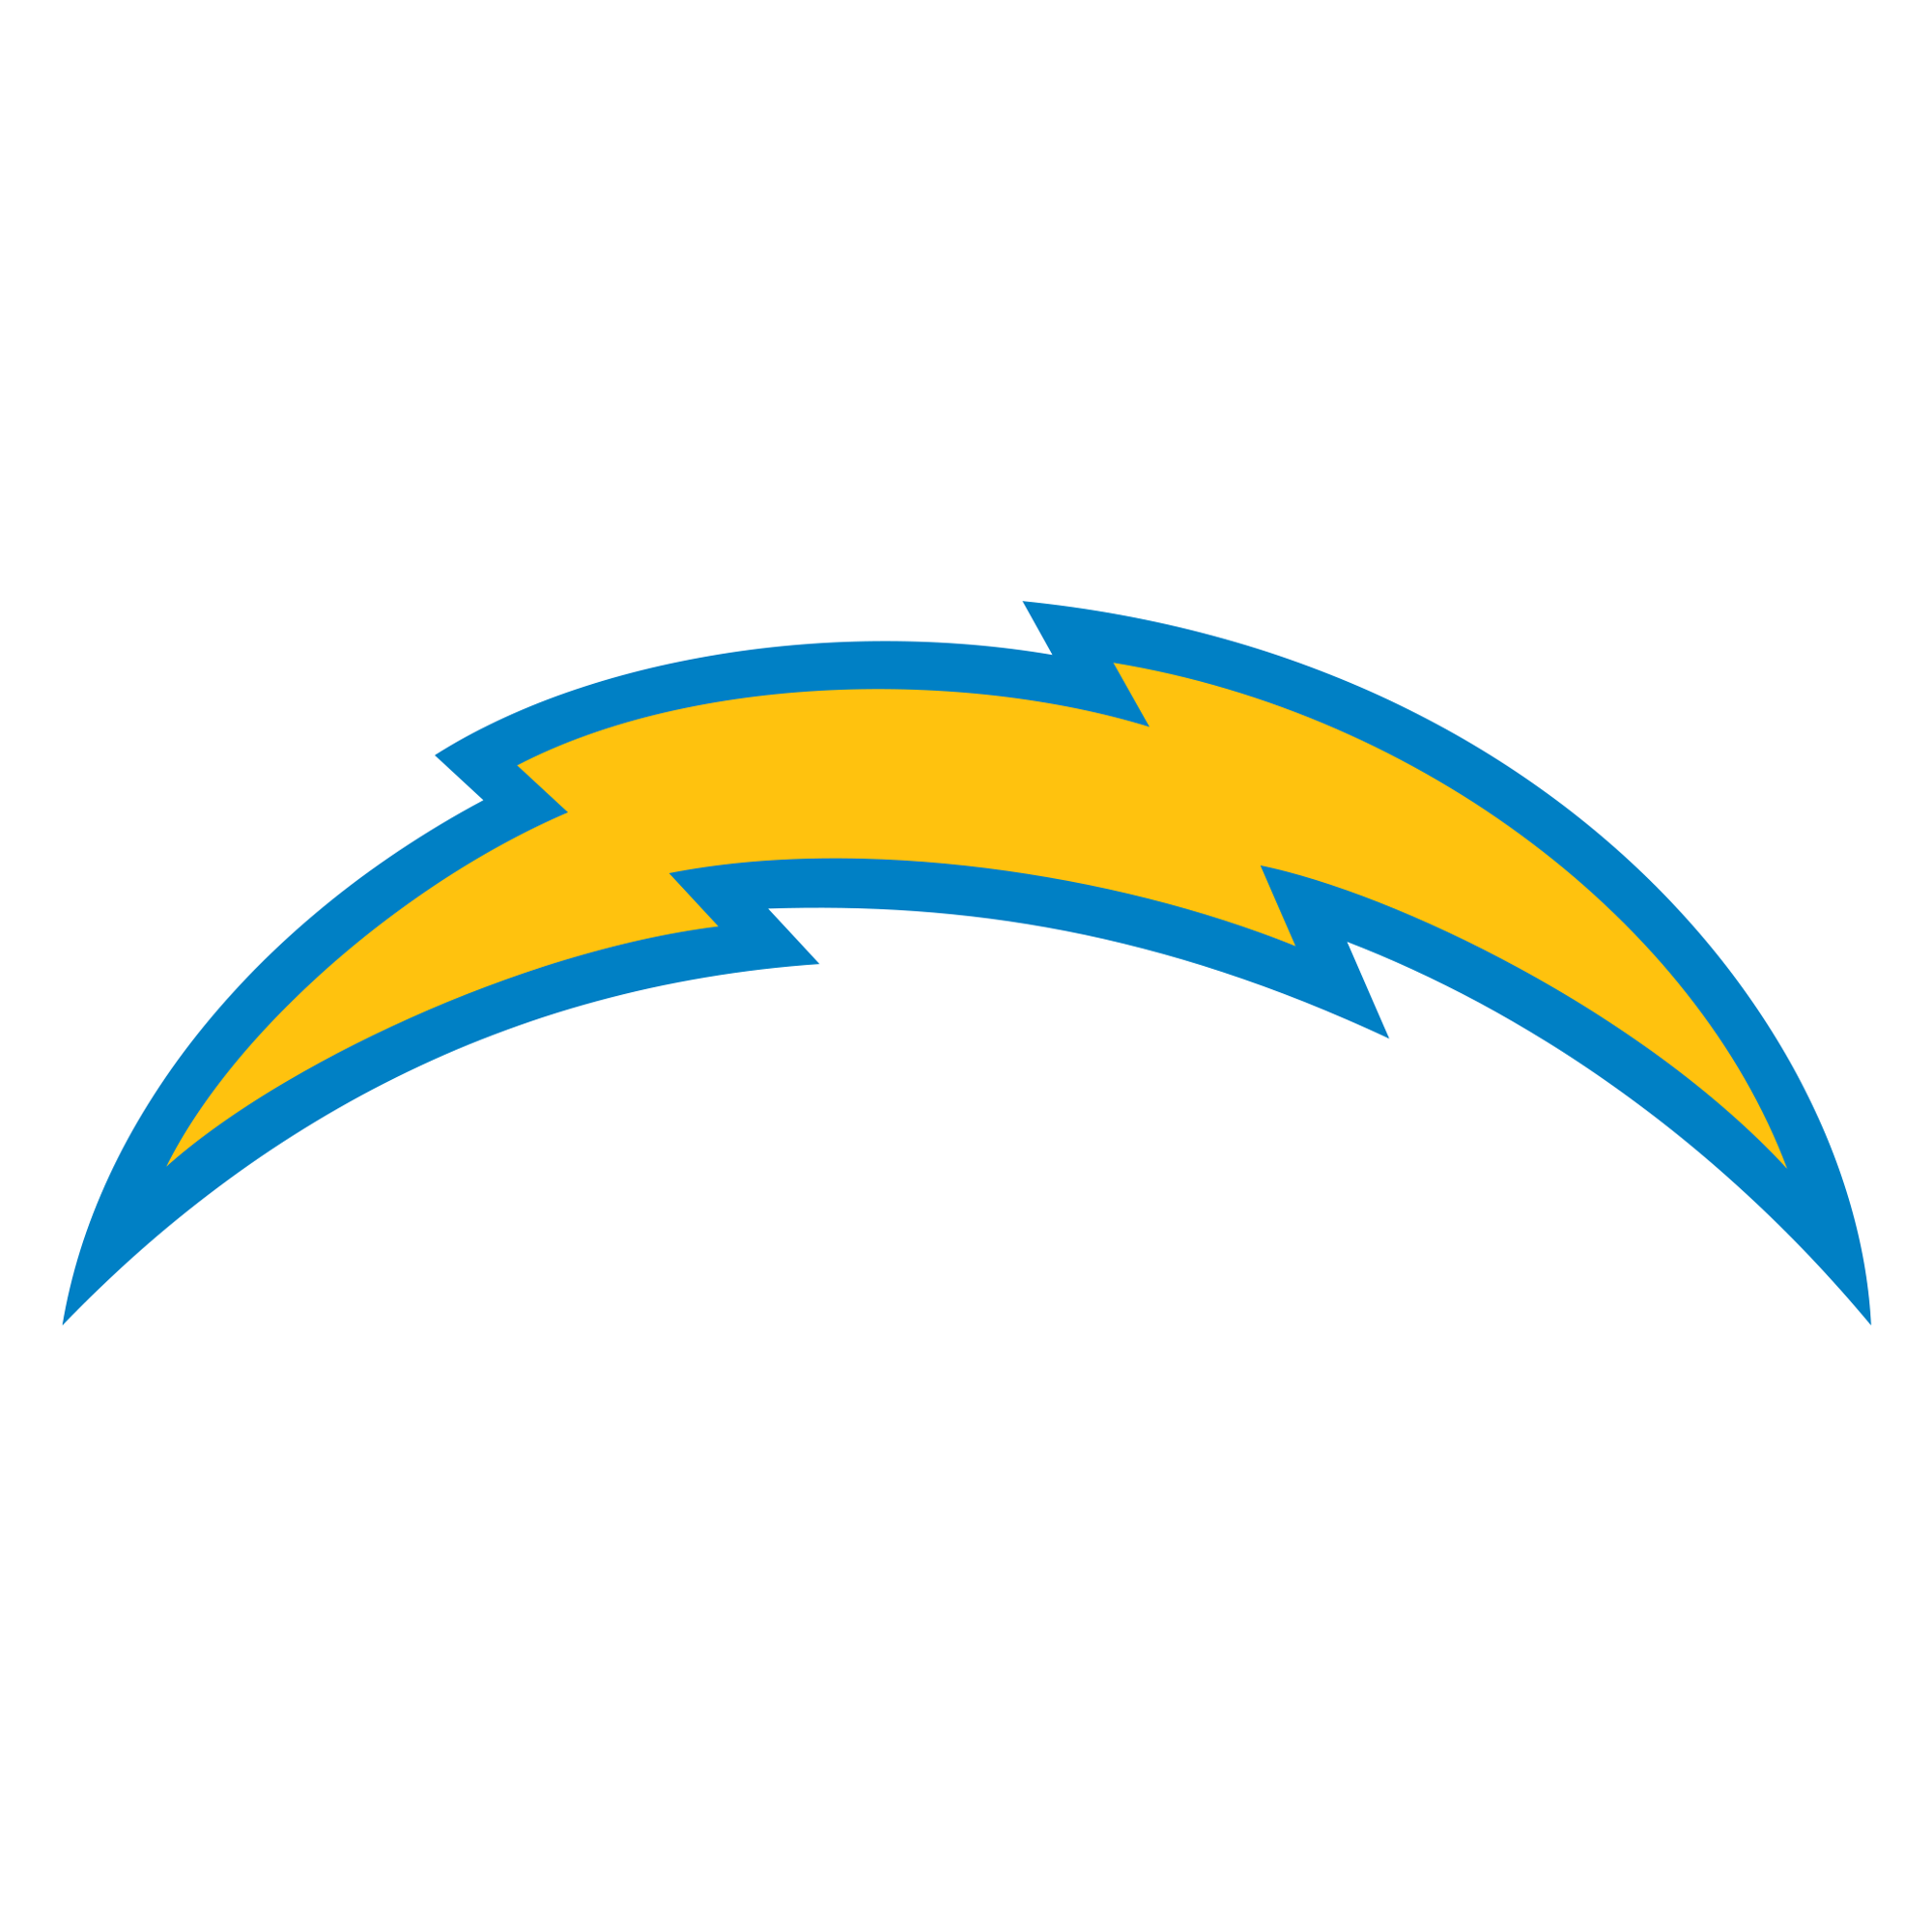 Field goal on final play propels Los Angeles Chargers past Atlanta Falcons